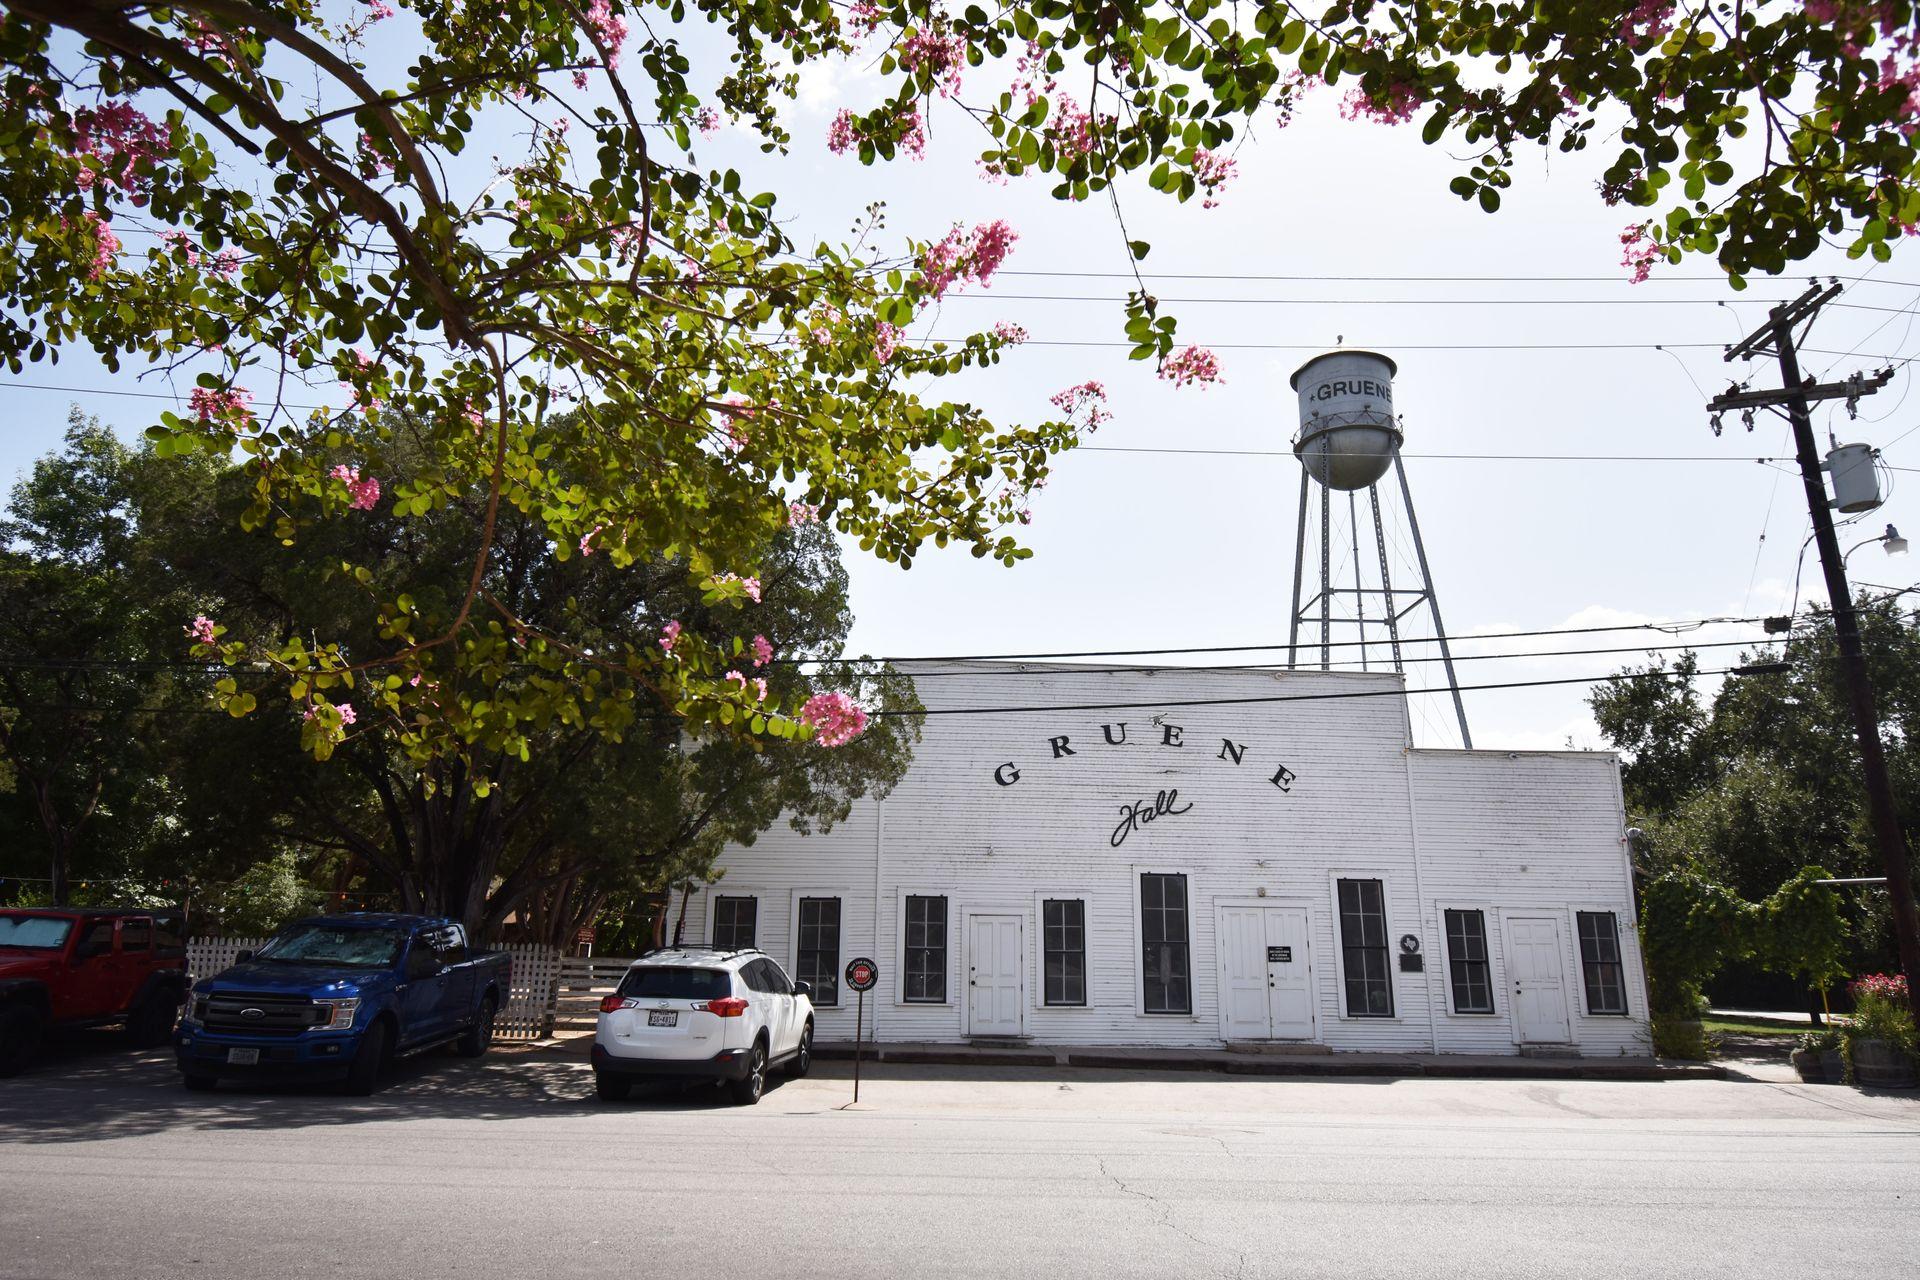 A view of the Gruene Dance Hall from across the street. There are green trees with pink flowers surrounding the building. You can see the Gruene water tower in the background.